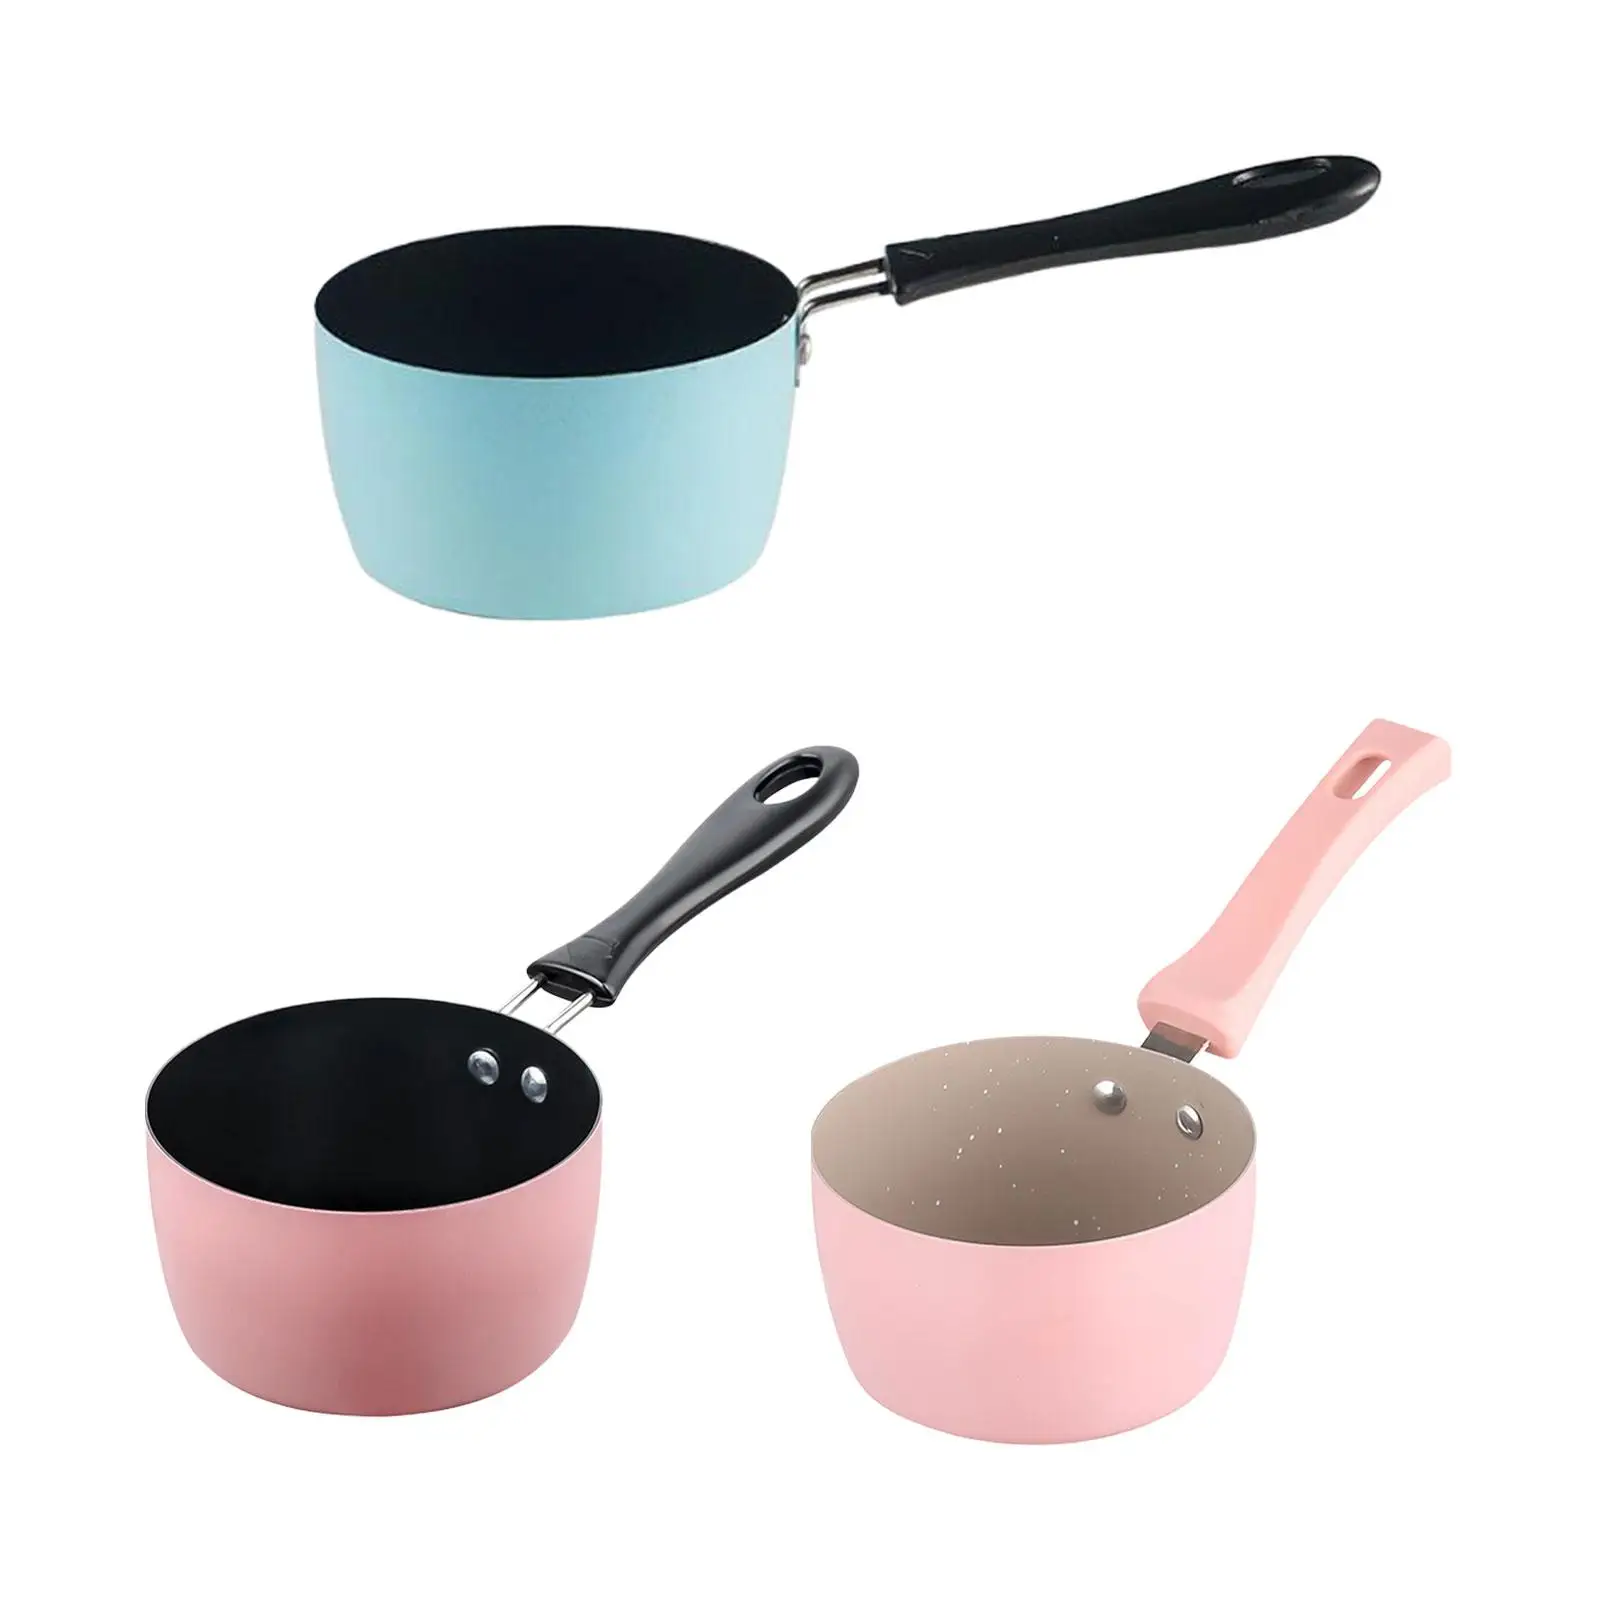 Milk Pan Multifunctional Thickened Non Stick Sauce Pan Small Saucepan for Stove Top Gas Stove Induction Cooker